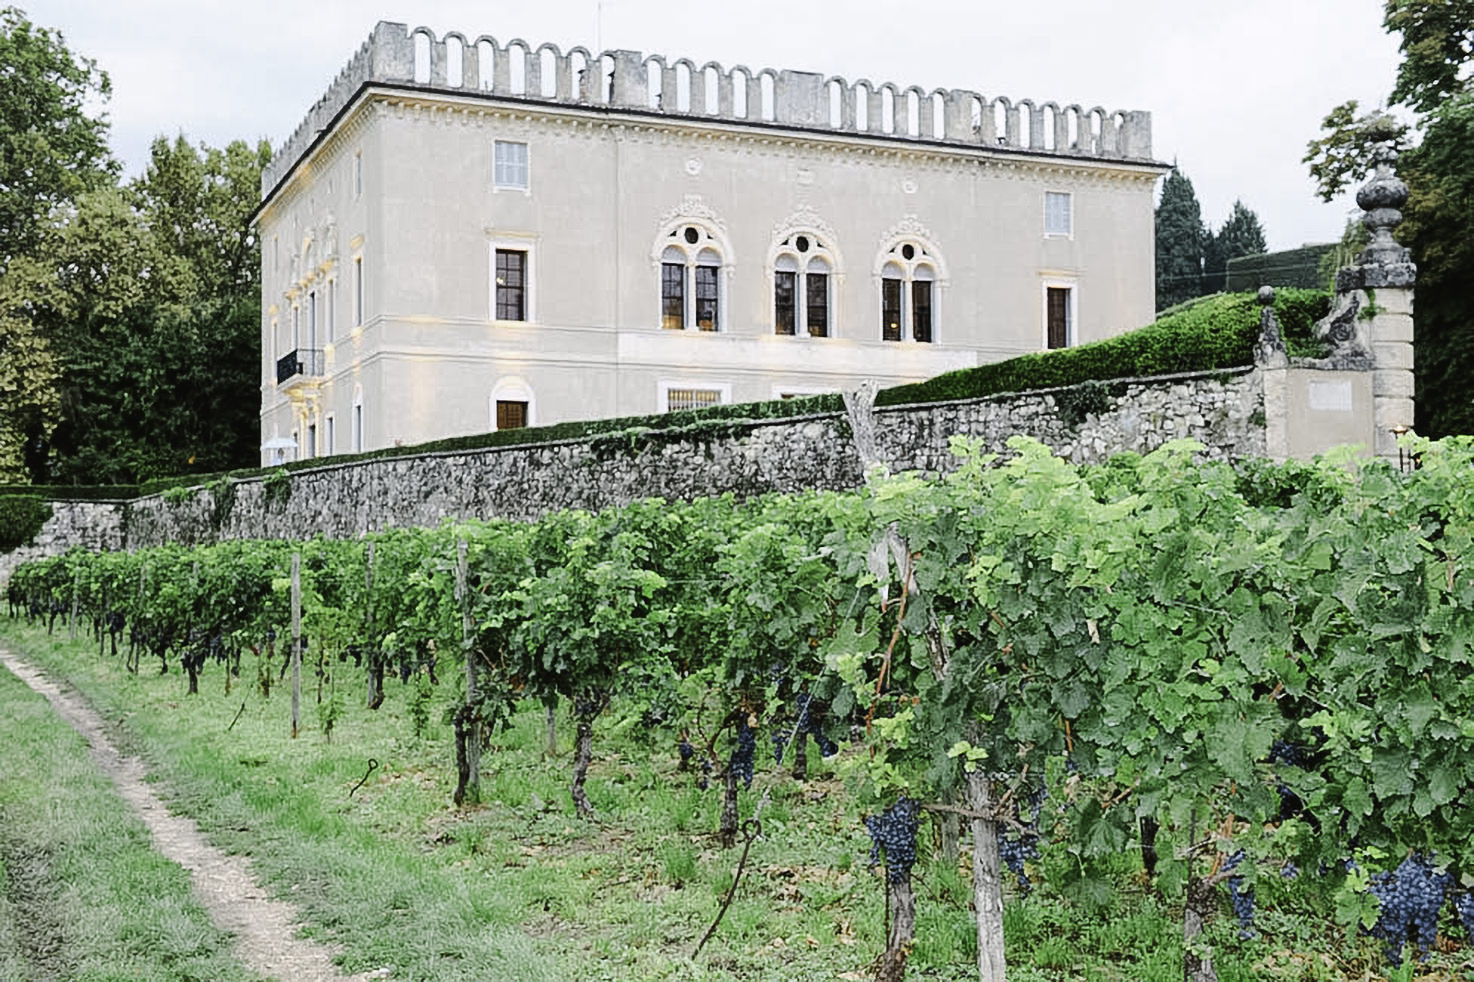 Villa Rizzardi surrounded by vineyards